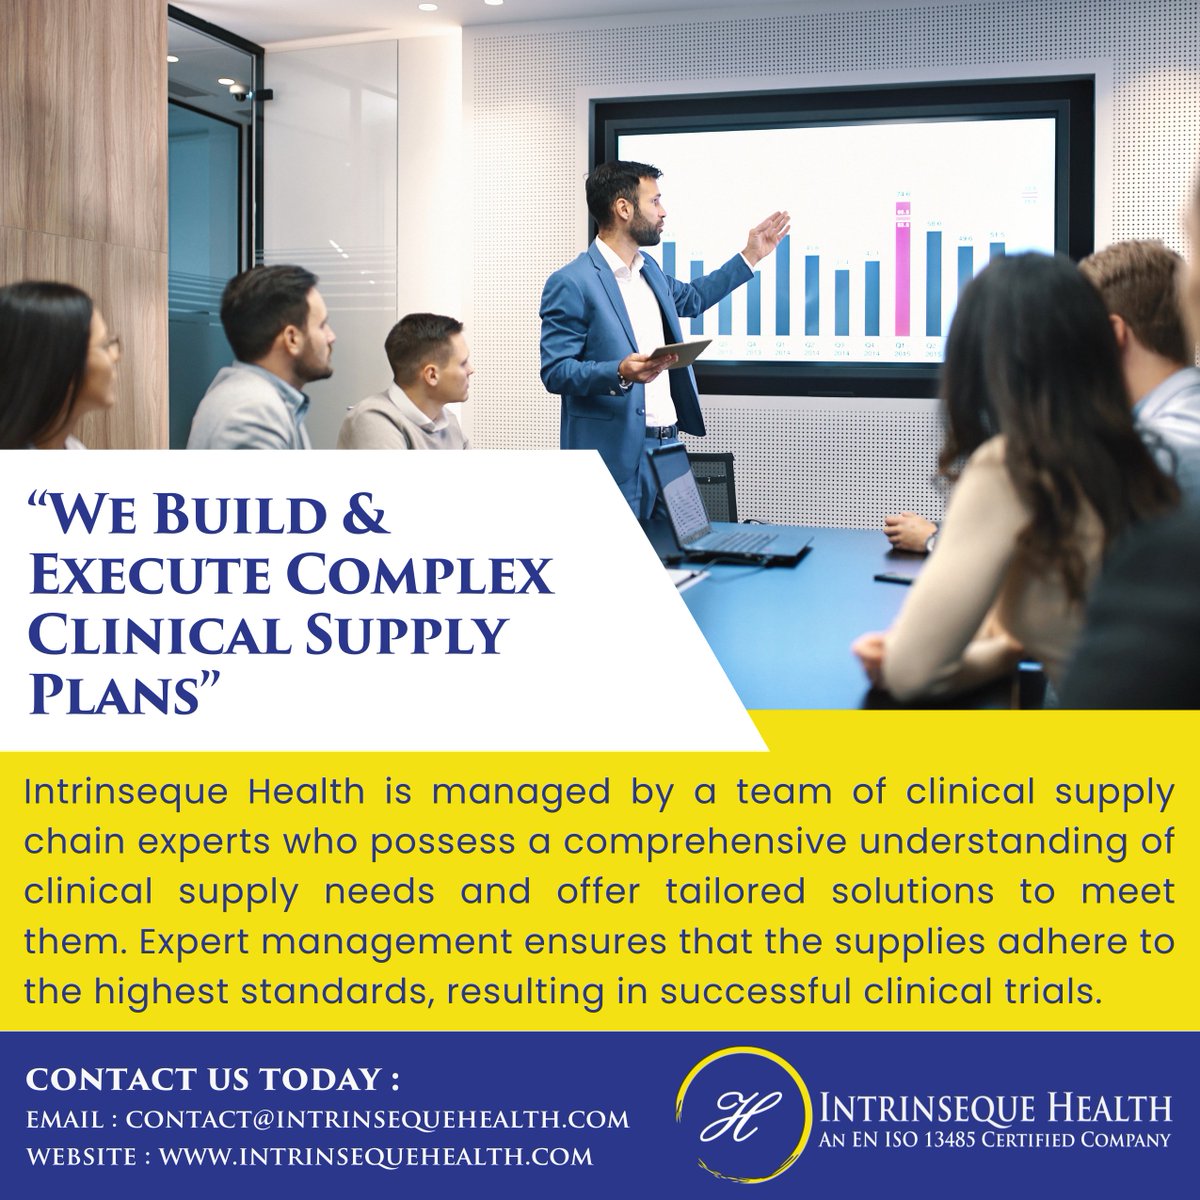 “We Build & Execute Complex Clinical Supply Plans”

#drugdiscovery #drugdevelopment #studystartup #clinicaltrials #healthcare #clinicalresearch #patientrecruitment #sitemanagement #clinicaldevelopment #clinicaltrial #clinicaloperations #clinicalstudy #clinicalsupply